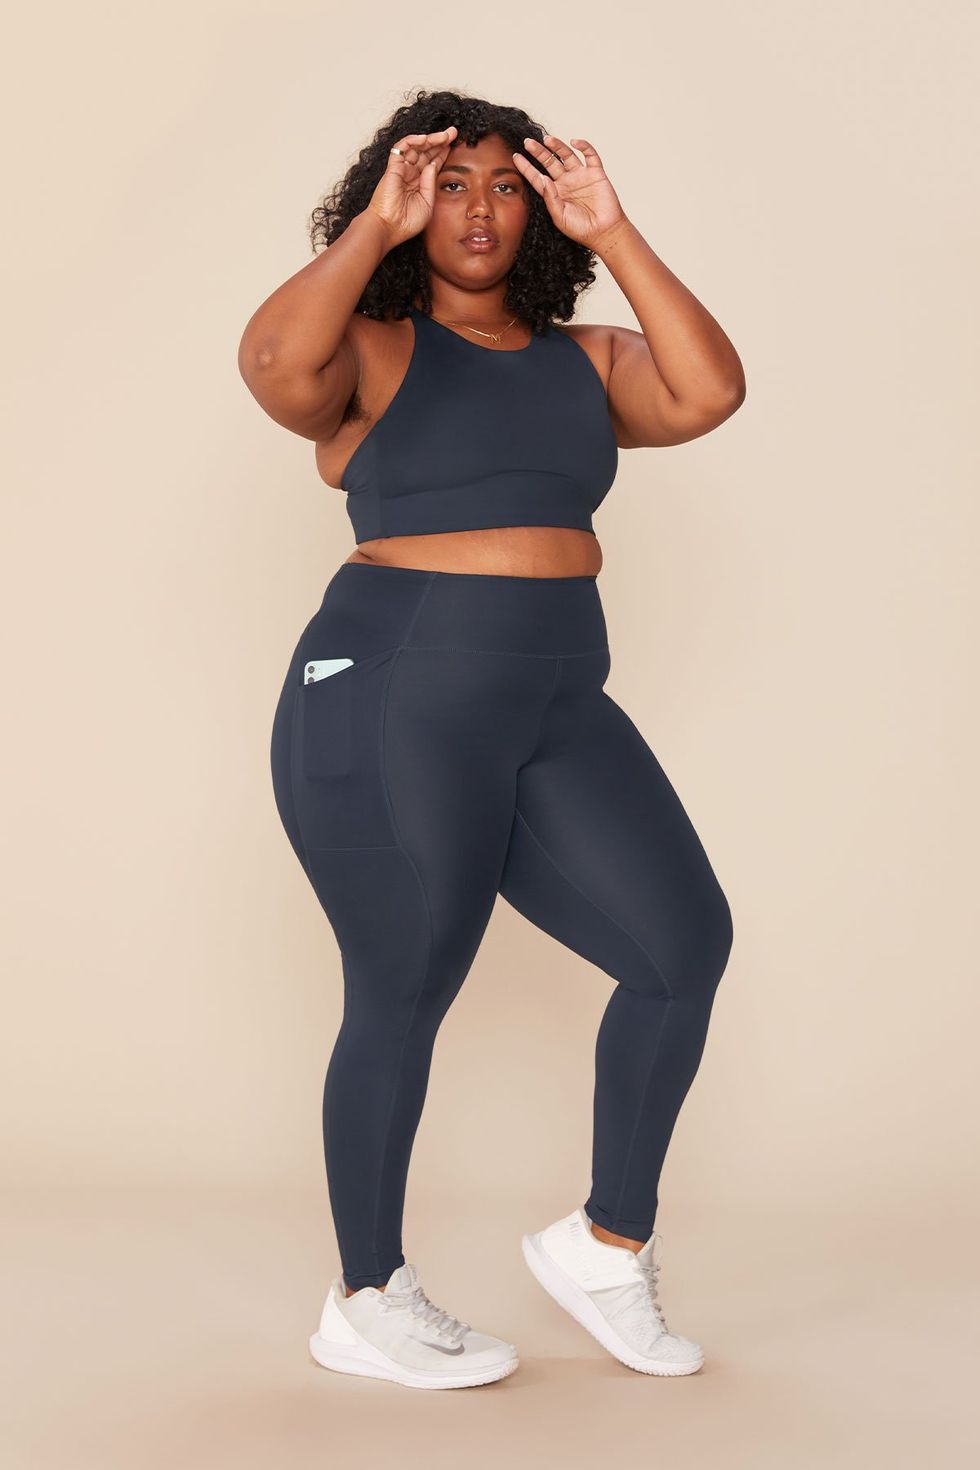 Where To Find The Best Plus-Size Workout Clothes And Activewear